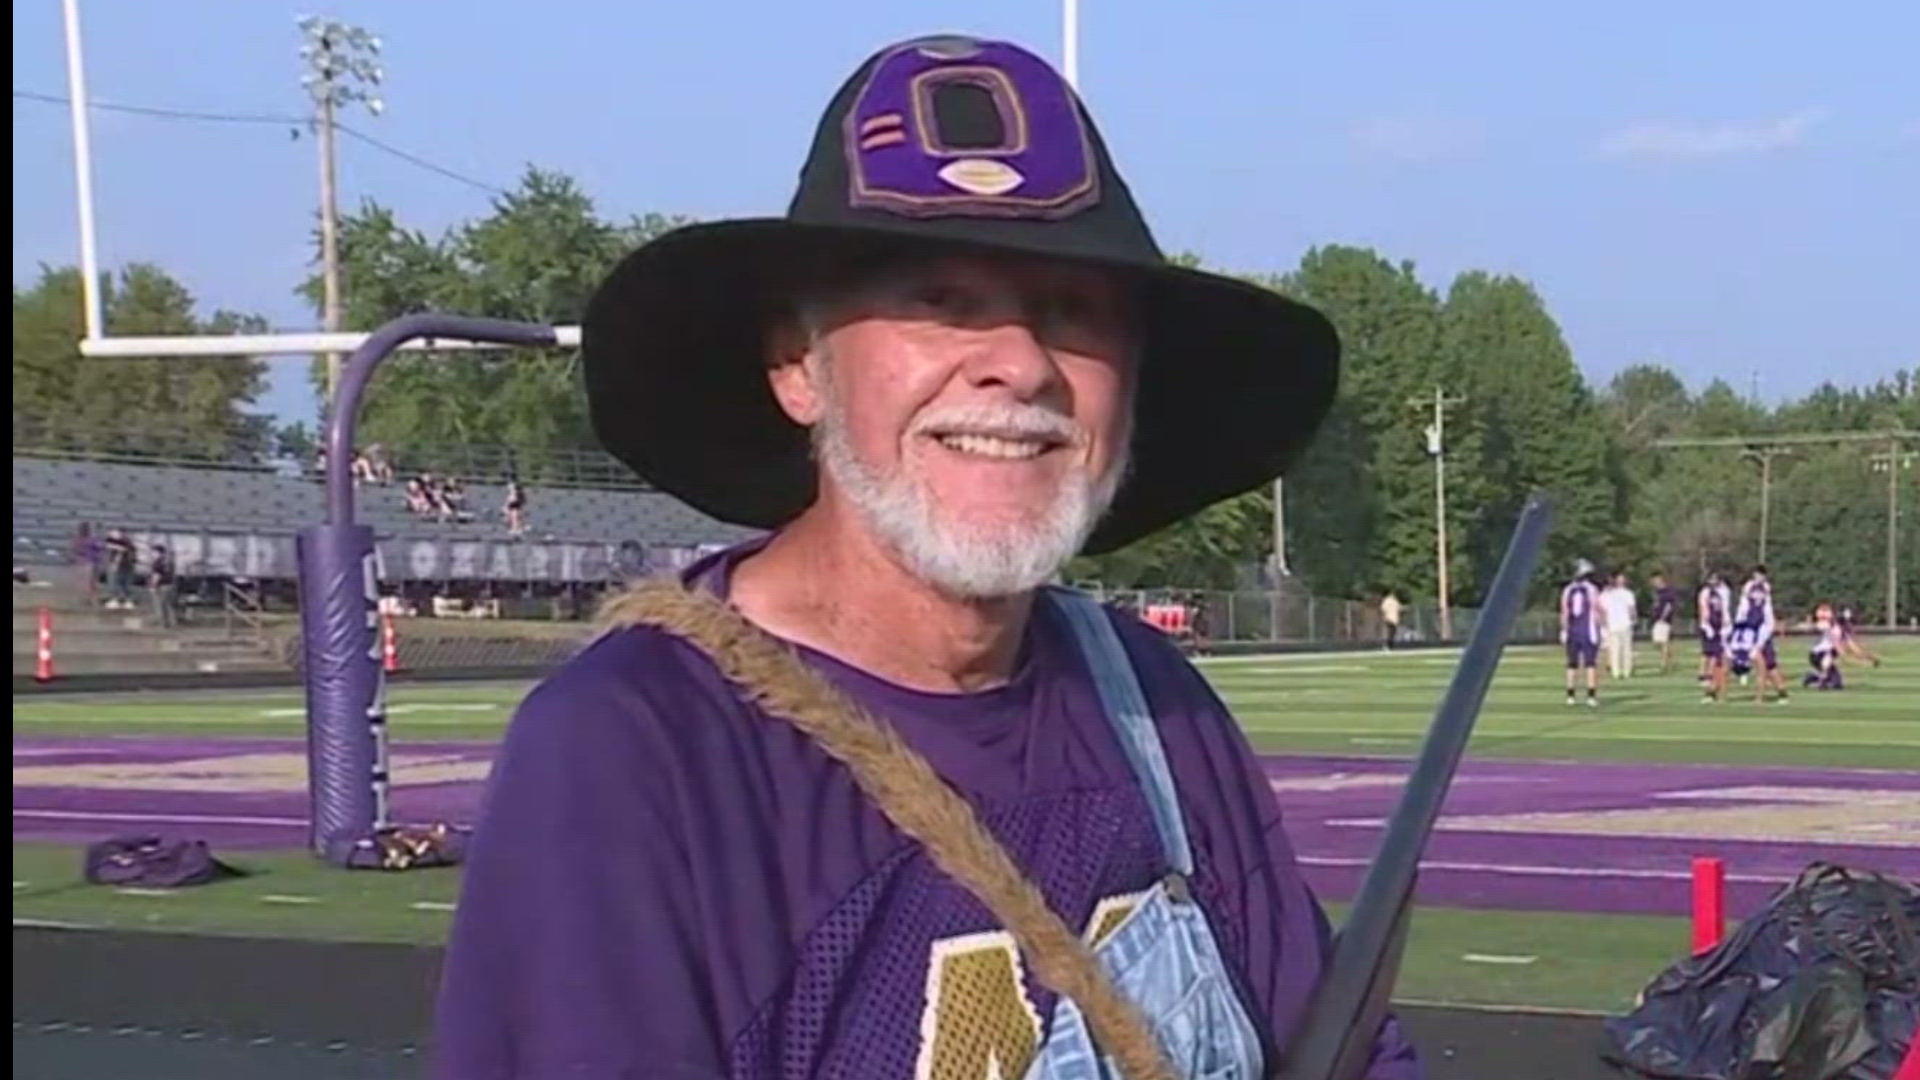 The Ozark mascot, Mr. Hillbilly, tells us the story of how he has been the team's mascot for 27 years.